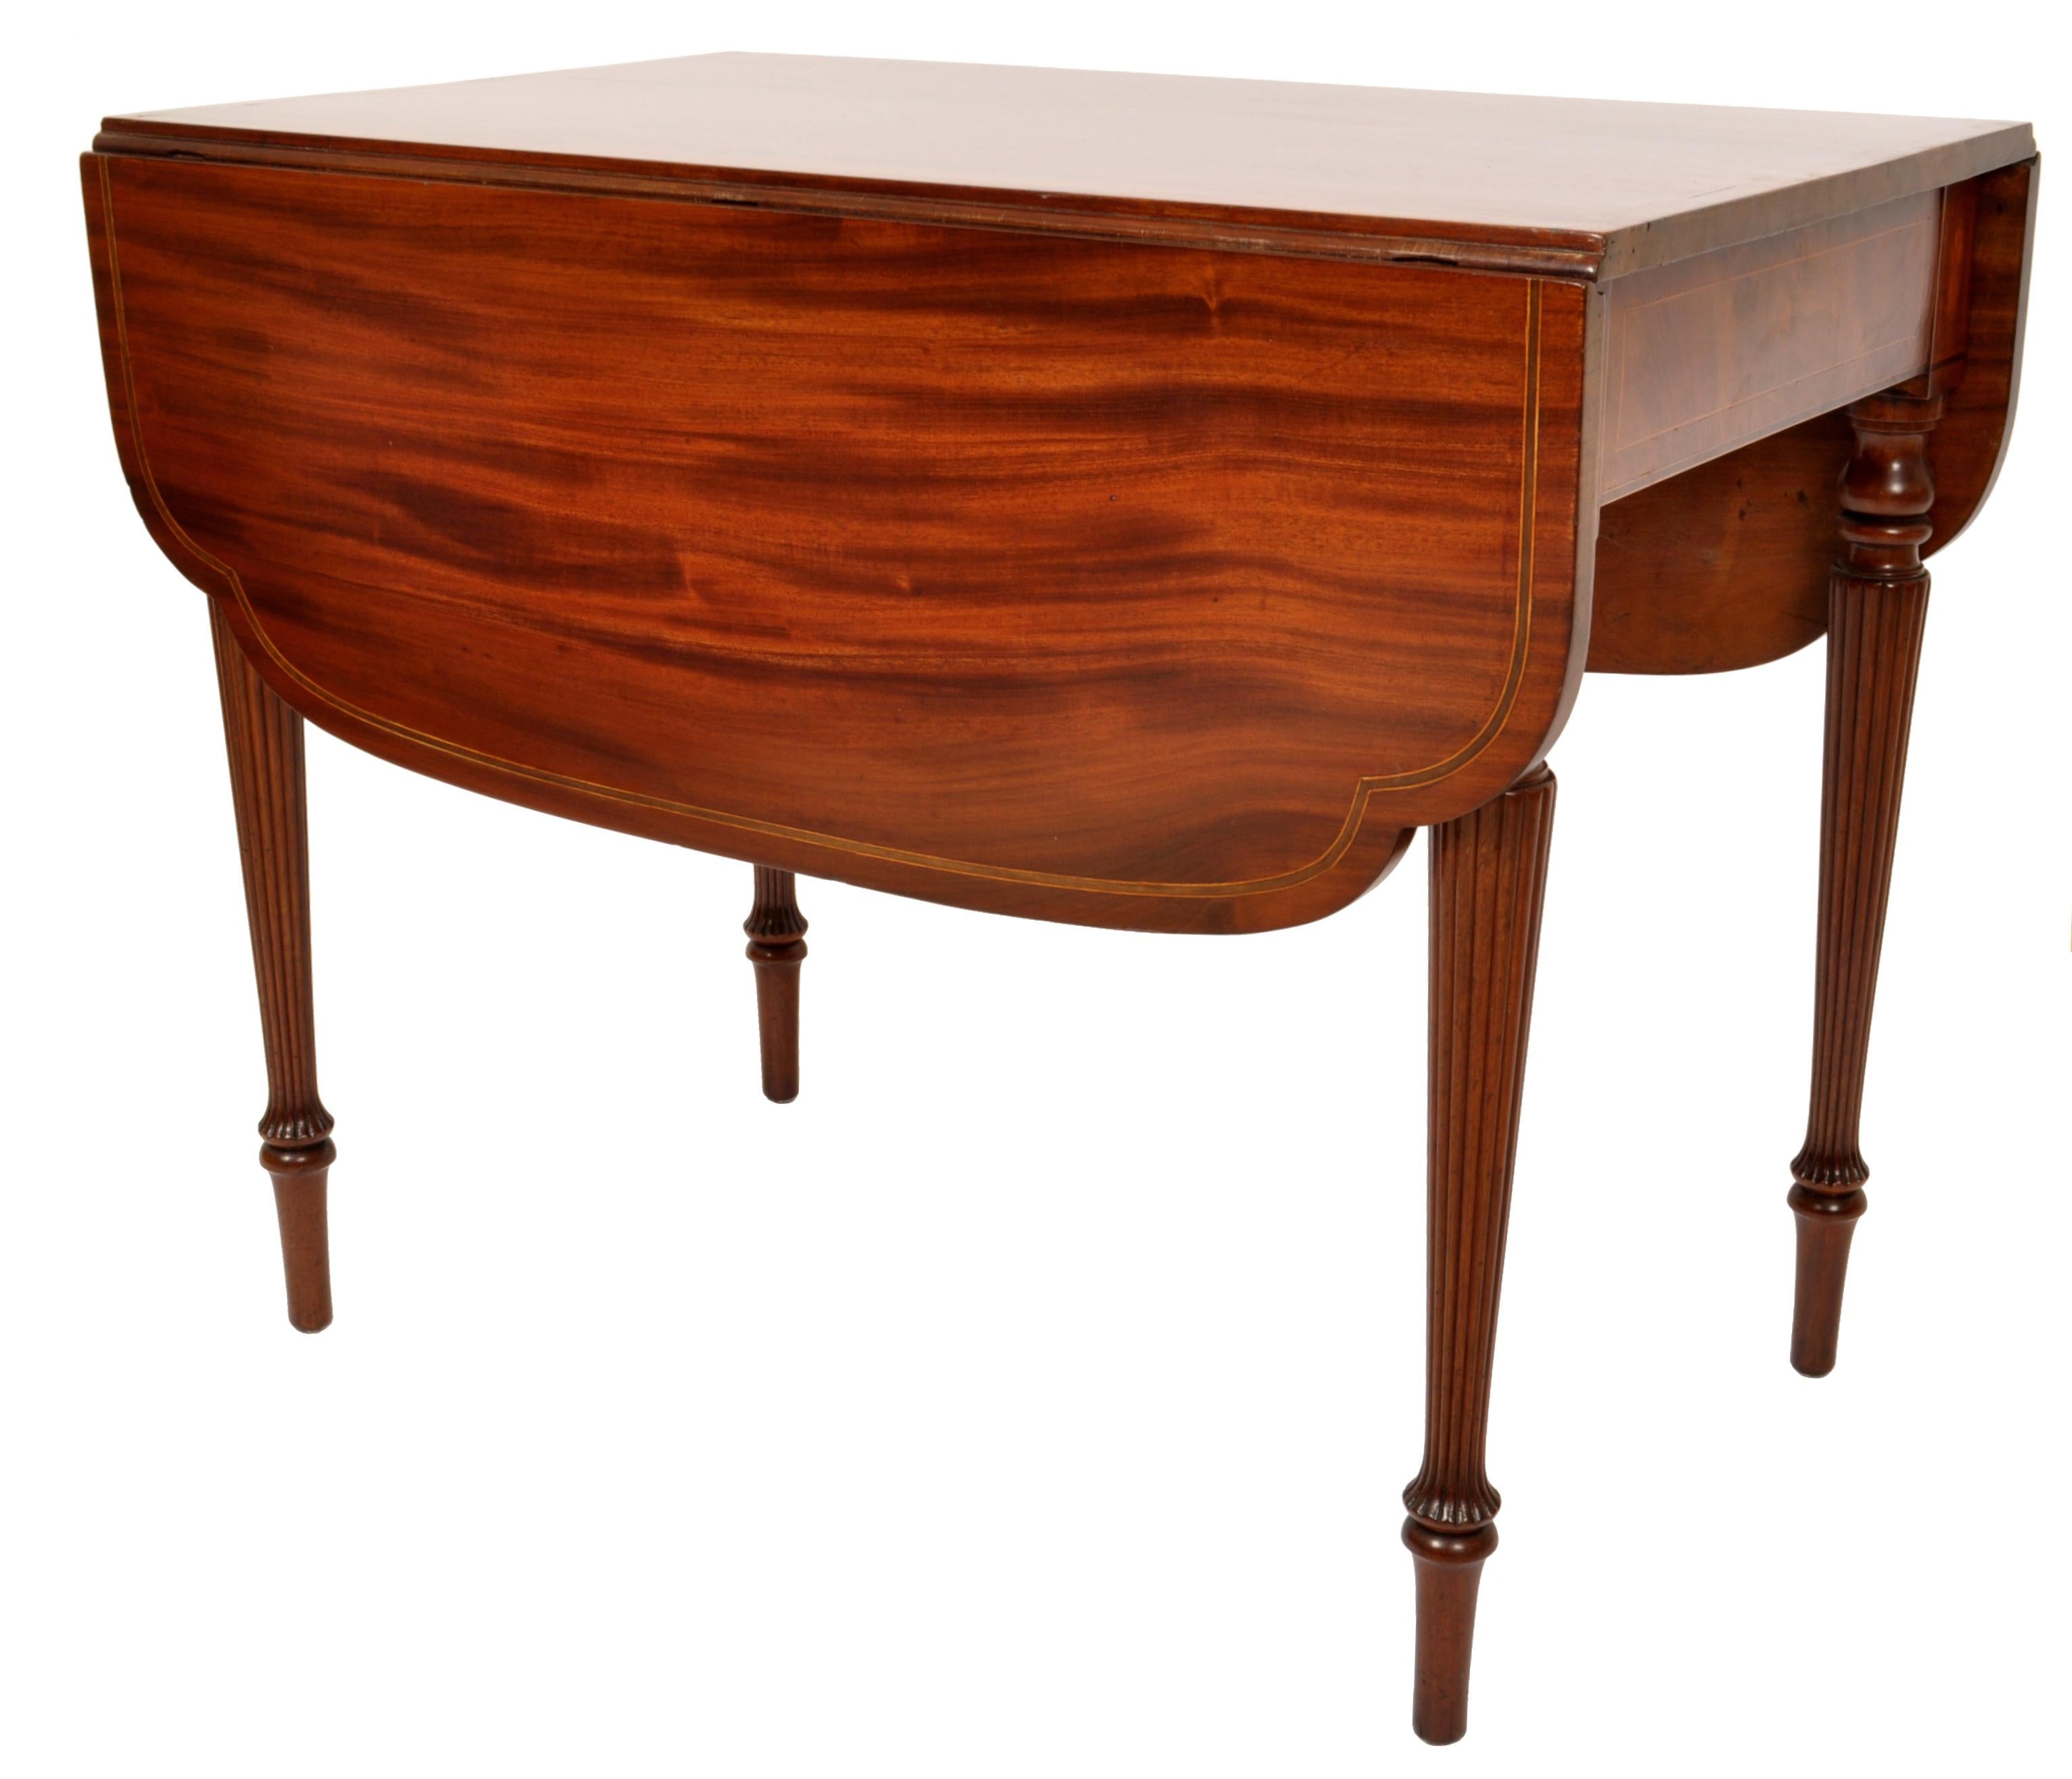 Antique American Federal Sheraton Inlaid Mahogany Pembroke Table New York 1790 In Good Condition For Sale In Portland, OR